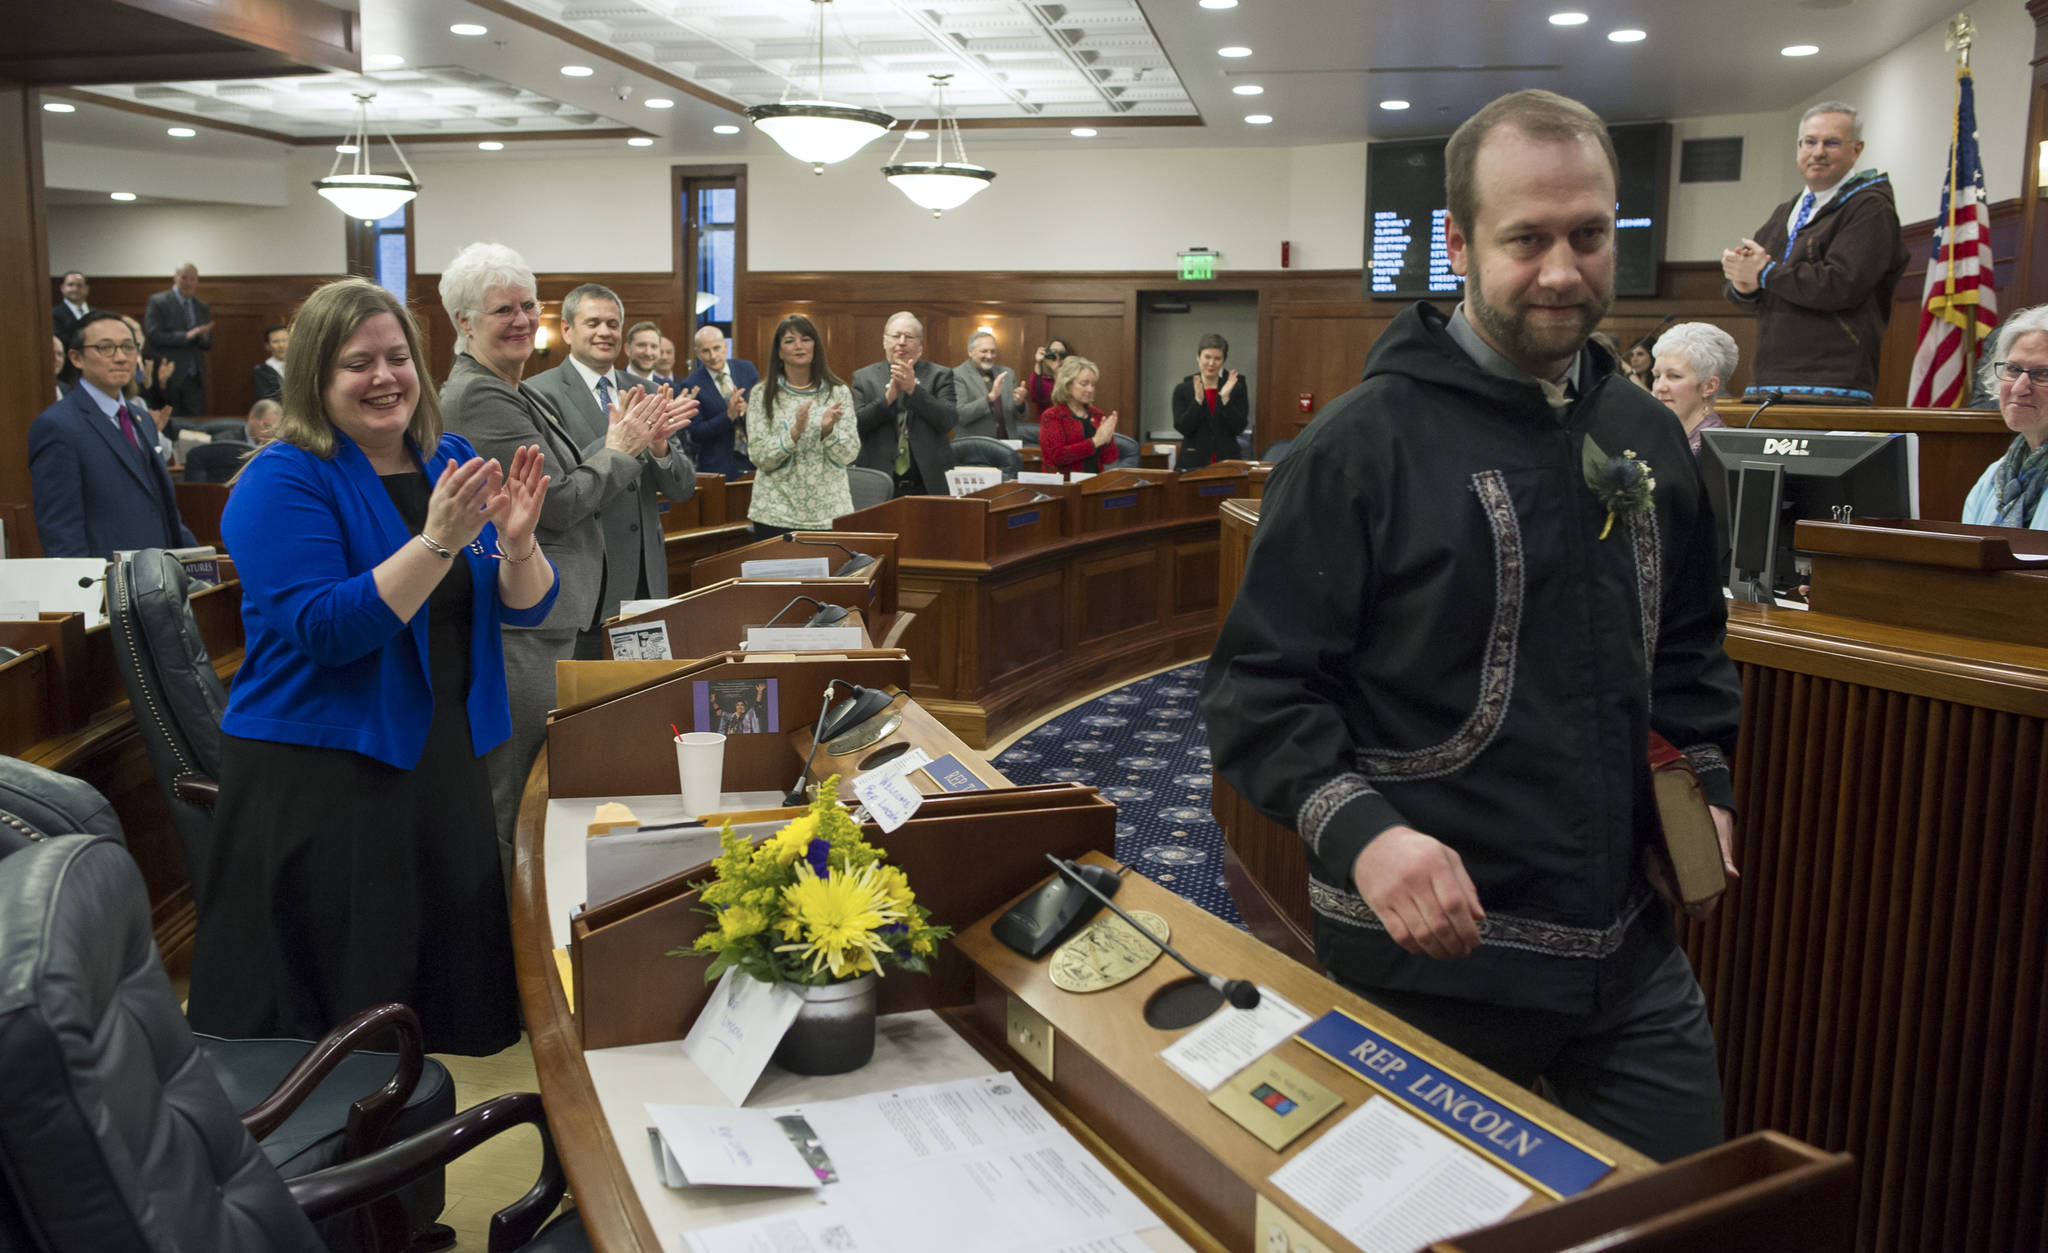 Rep. John Lincoln, D-Kotzebue, walks to his seat after being sworn into office by Speaker of the House Bryce Edgmon, D-Dillingham, in the House chambers on Wednesday, Jan. 31, 2018. Rep. Lincoln is filling the open seat left by former Rep. Dean Westlake, who resigned in December after female aides accused him of unwanted touching and inappropriate comments. (Michael Penn | Juneau Empire File)